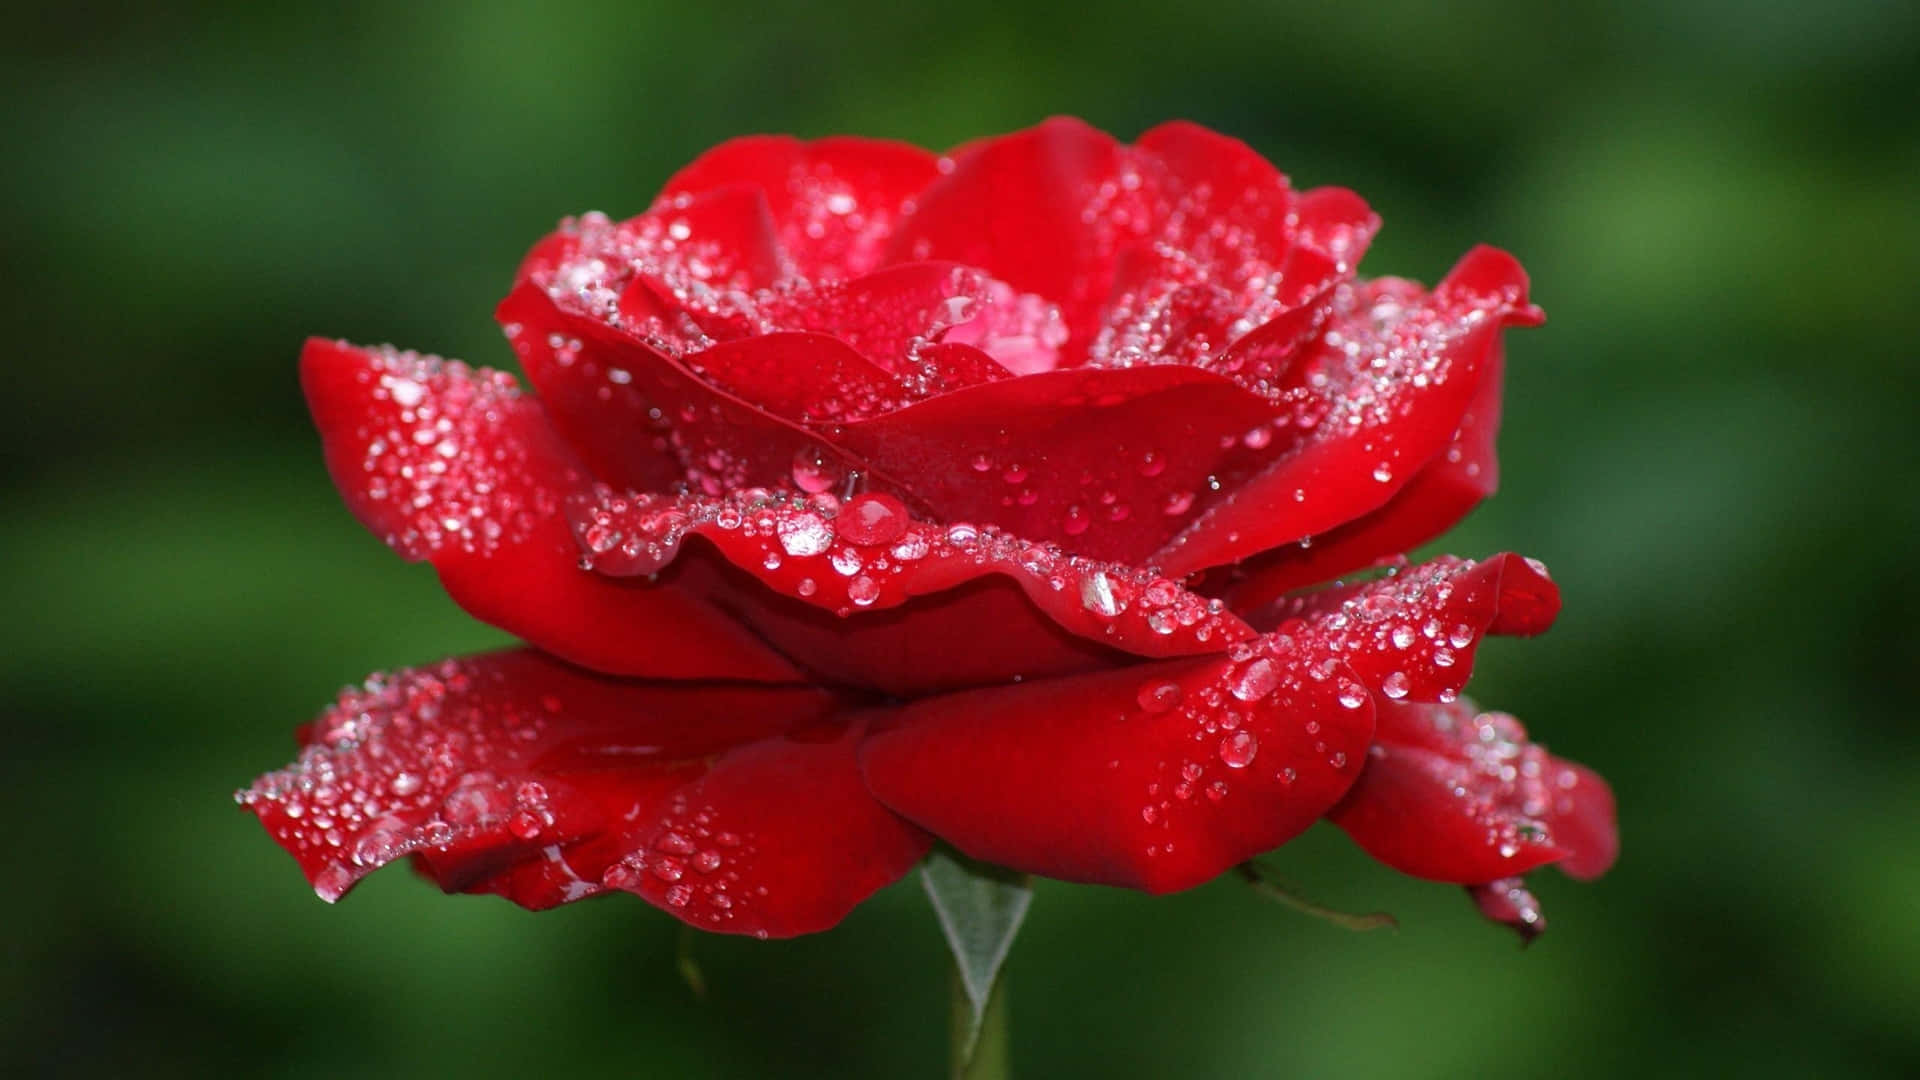 1080p Red Rose With Dew Drops Background